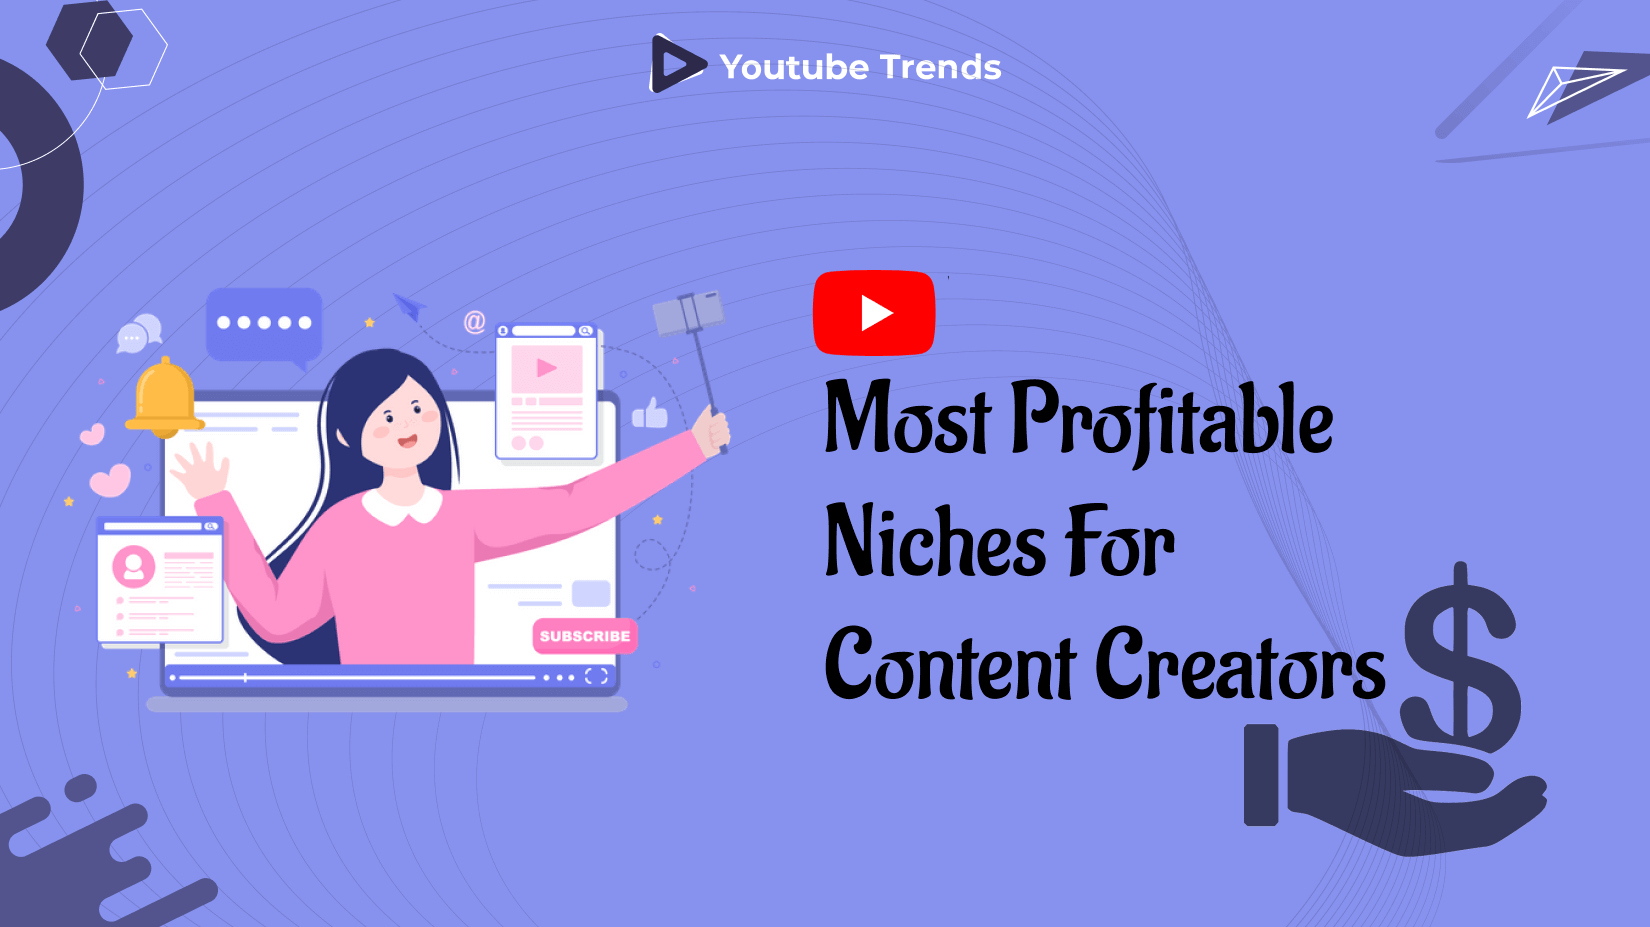 YouTube’s Most Profitable Niches for Content Creators